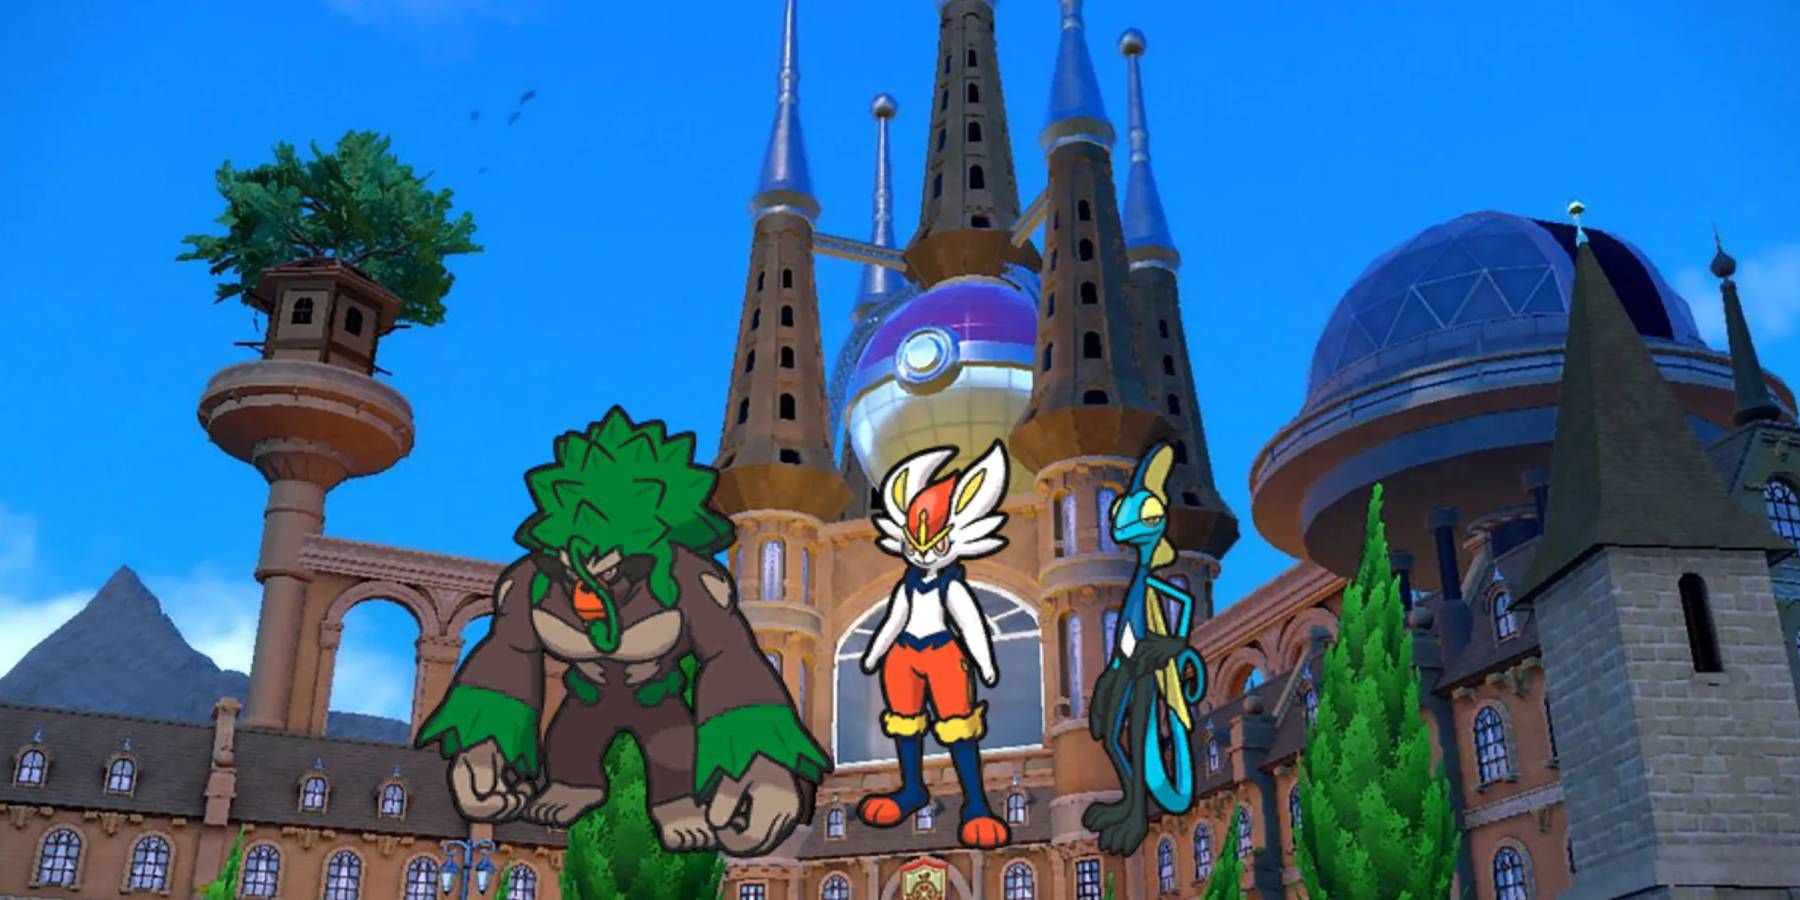 Rillaboom, Cinderace, and Inteleon in front of Uva Academy from Pokemon Scarlet and Violet